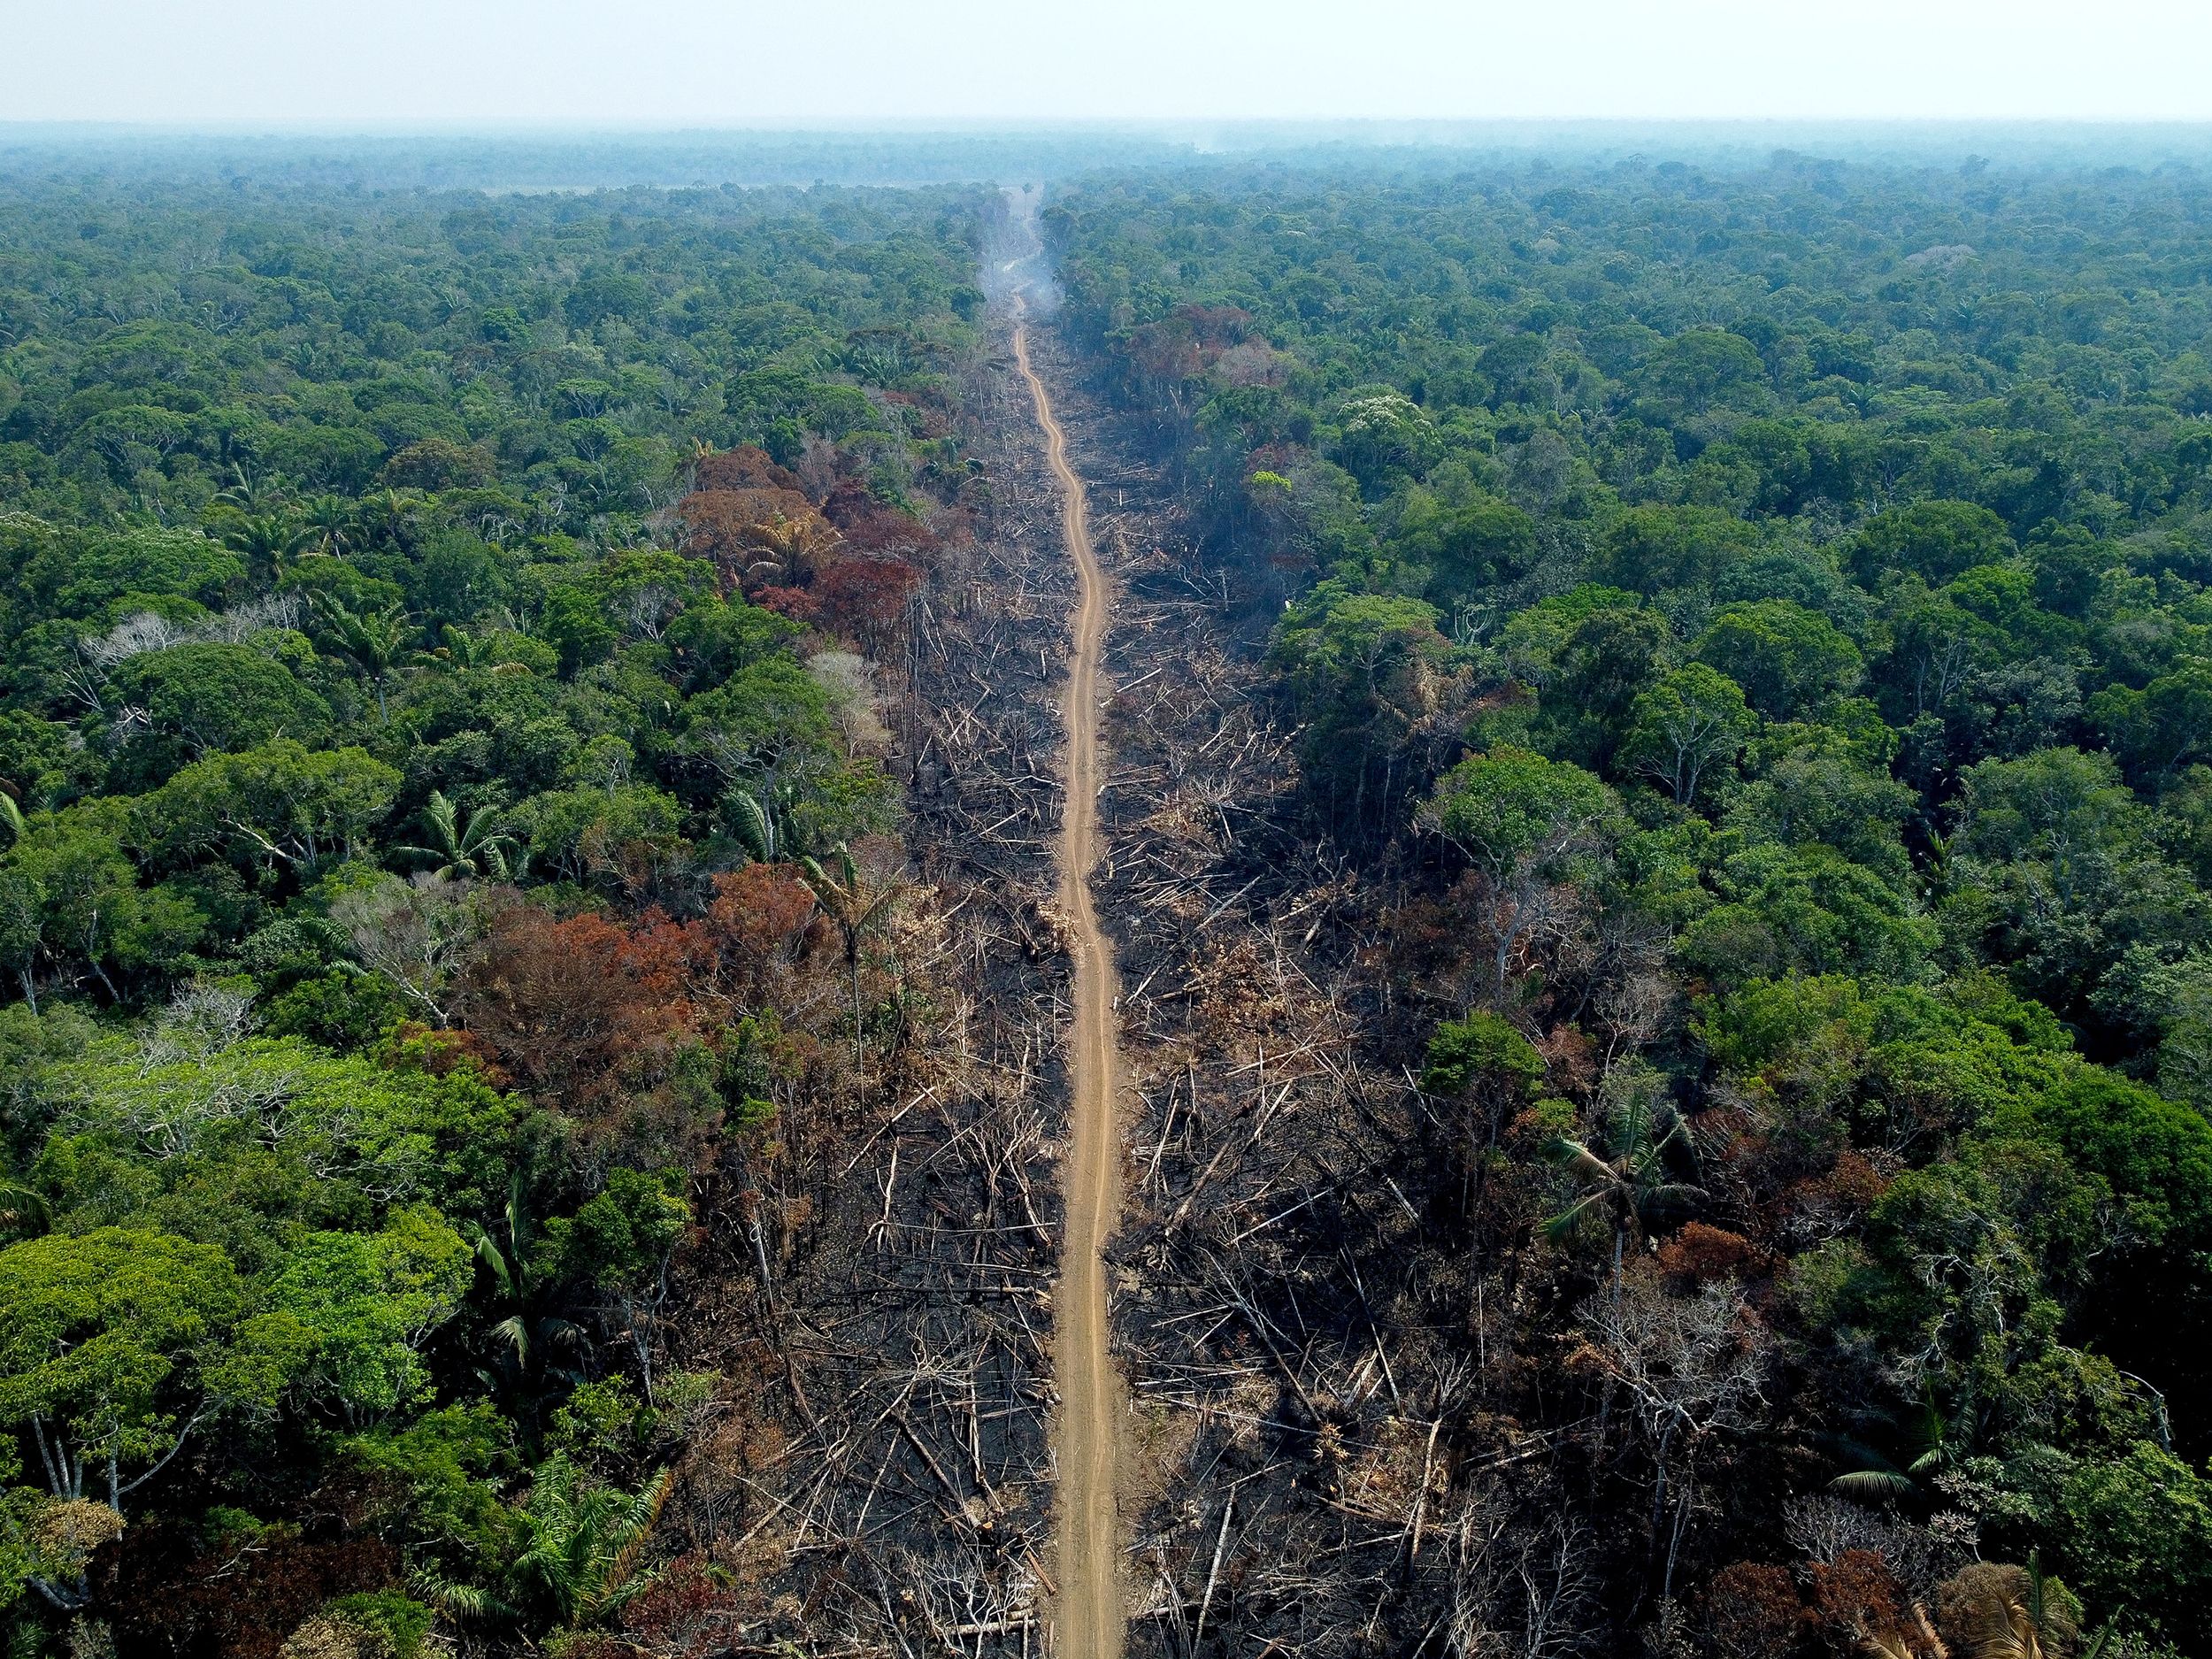 Deforestation is accelerating in Brazil as Bolsonaro's first term